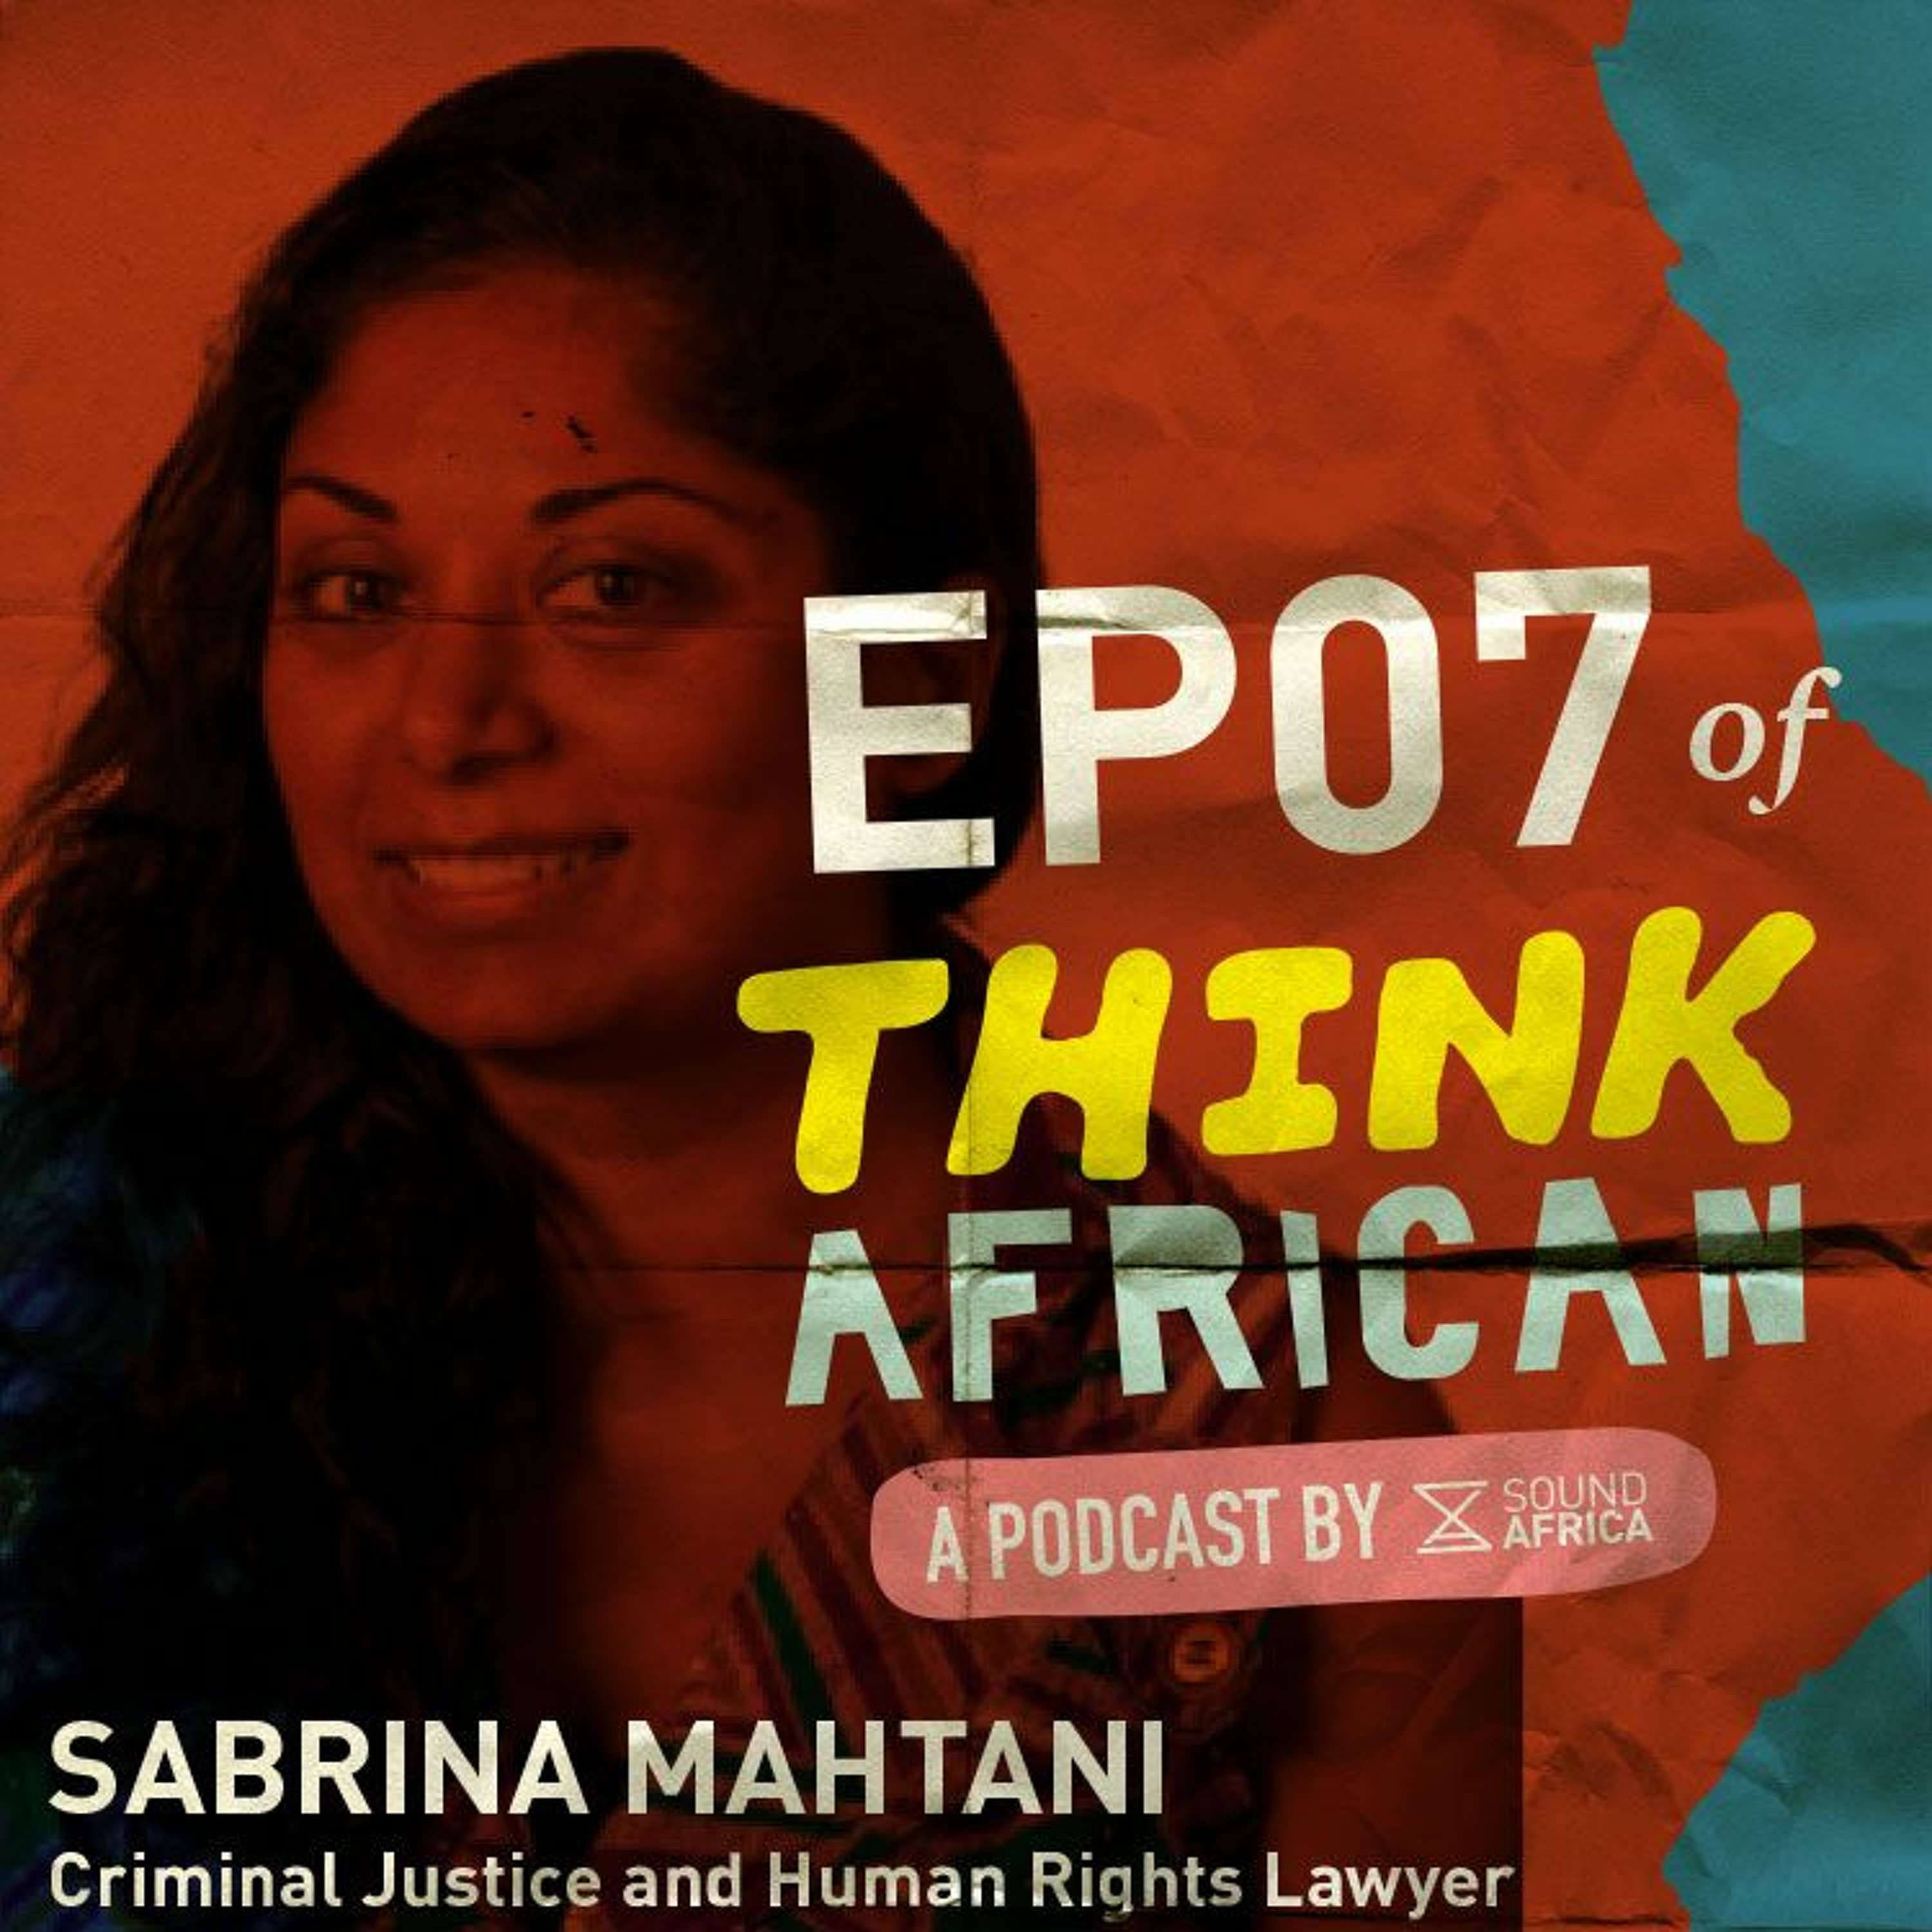 Think African Episode 7